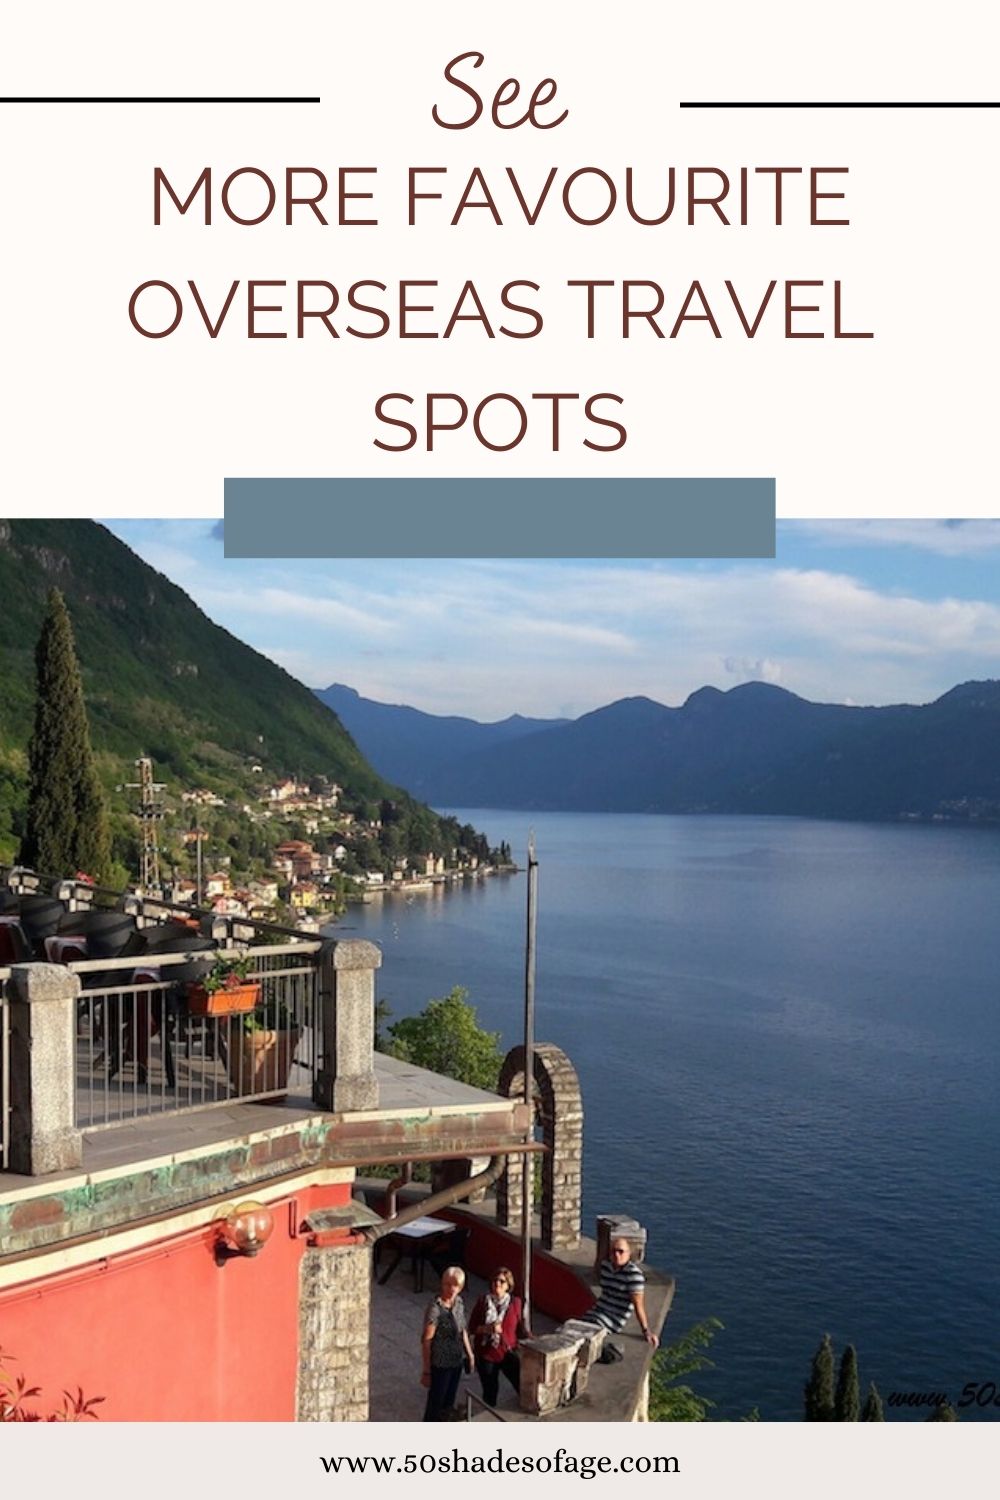 More Favourite Overseas Travel Spots